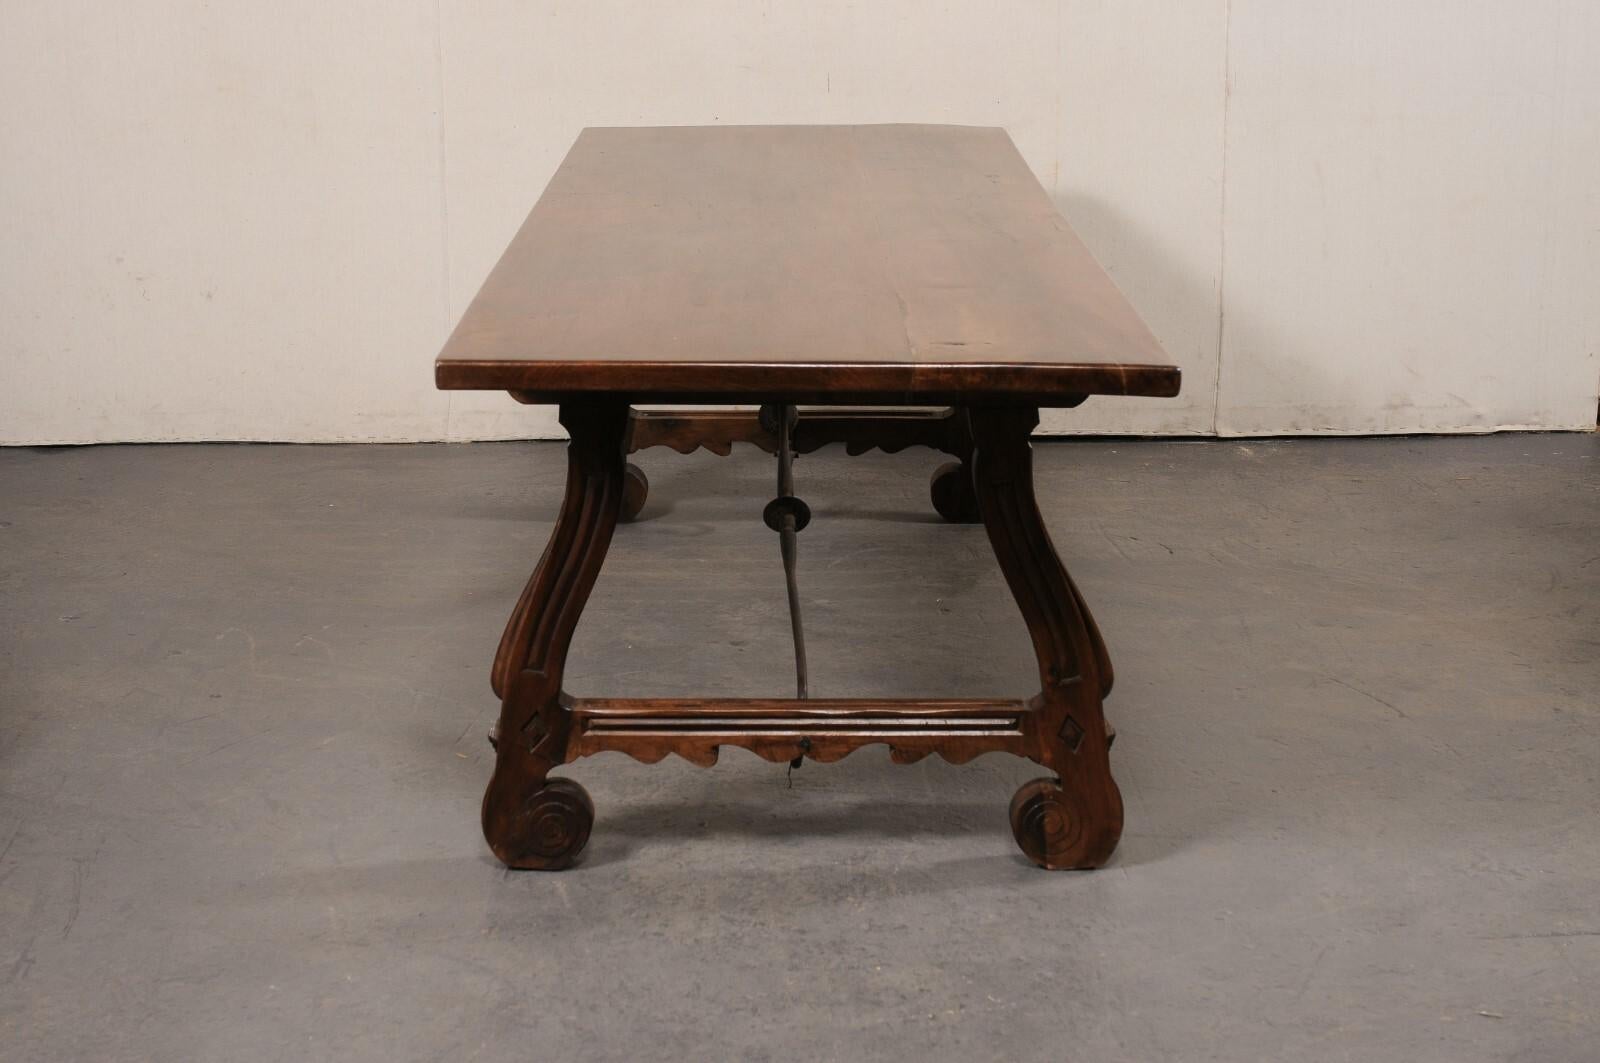 Spanish Carved Walnut Wood Trestle-Leg Table w/Forged Iron Stretcher, 8+ Ft Long For Sale 3